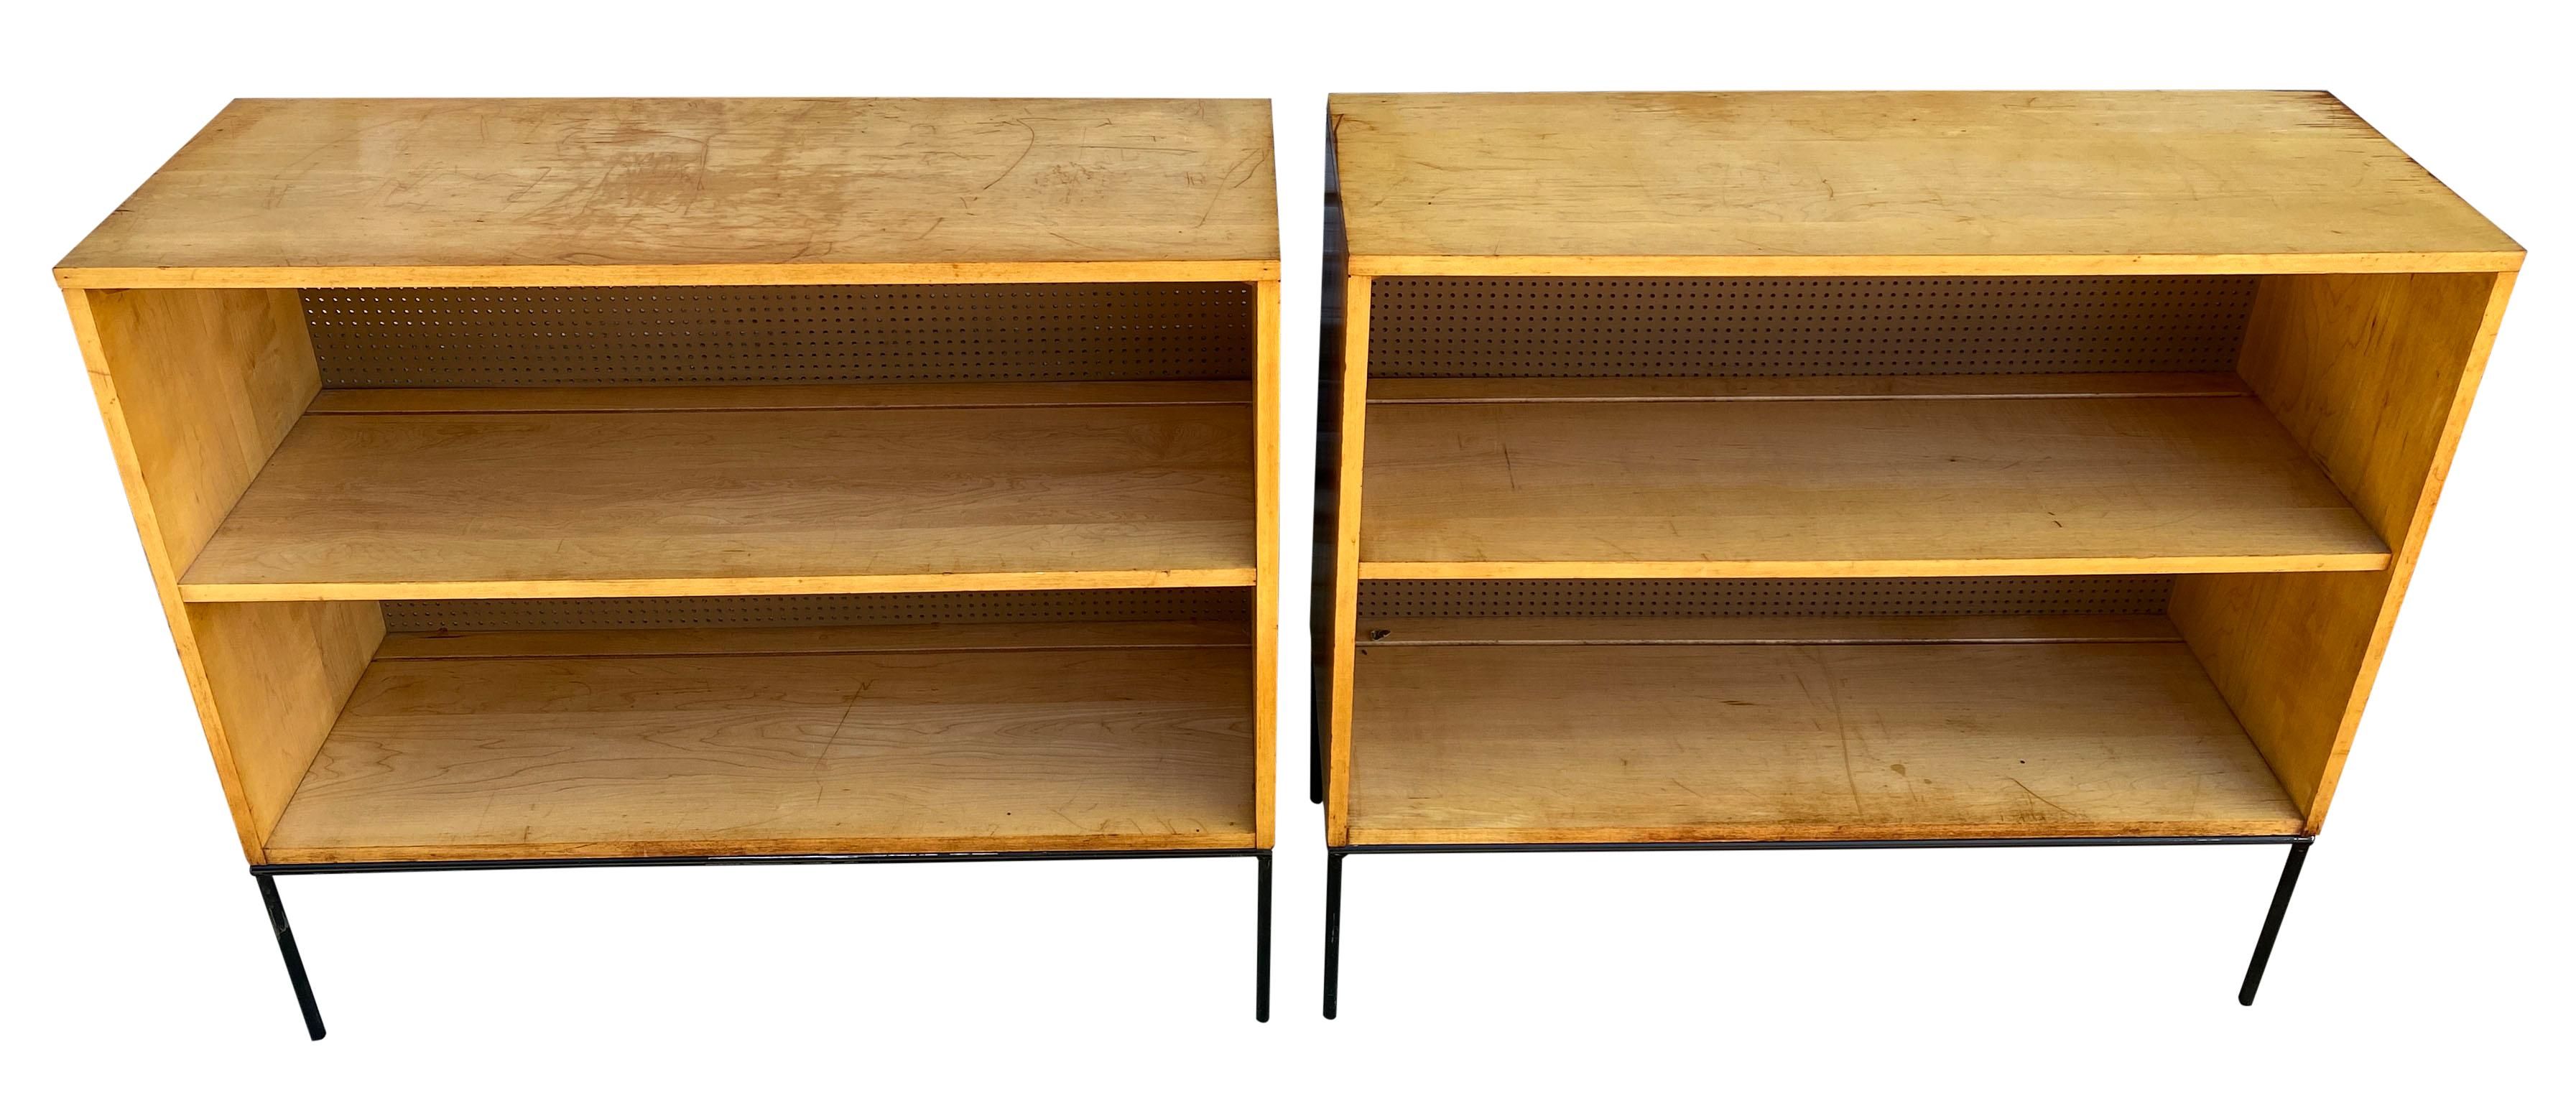 (2) Vintage midcentury Paul McCobb single bookcases #1516 Blonde maple over maple with iron base with Perforated backs. Beautiful bookcase set by Paul McCobb, circa 1950s Planner Group, single center fixed shelf, solid maple with Raw Blonde finish